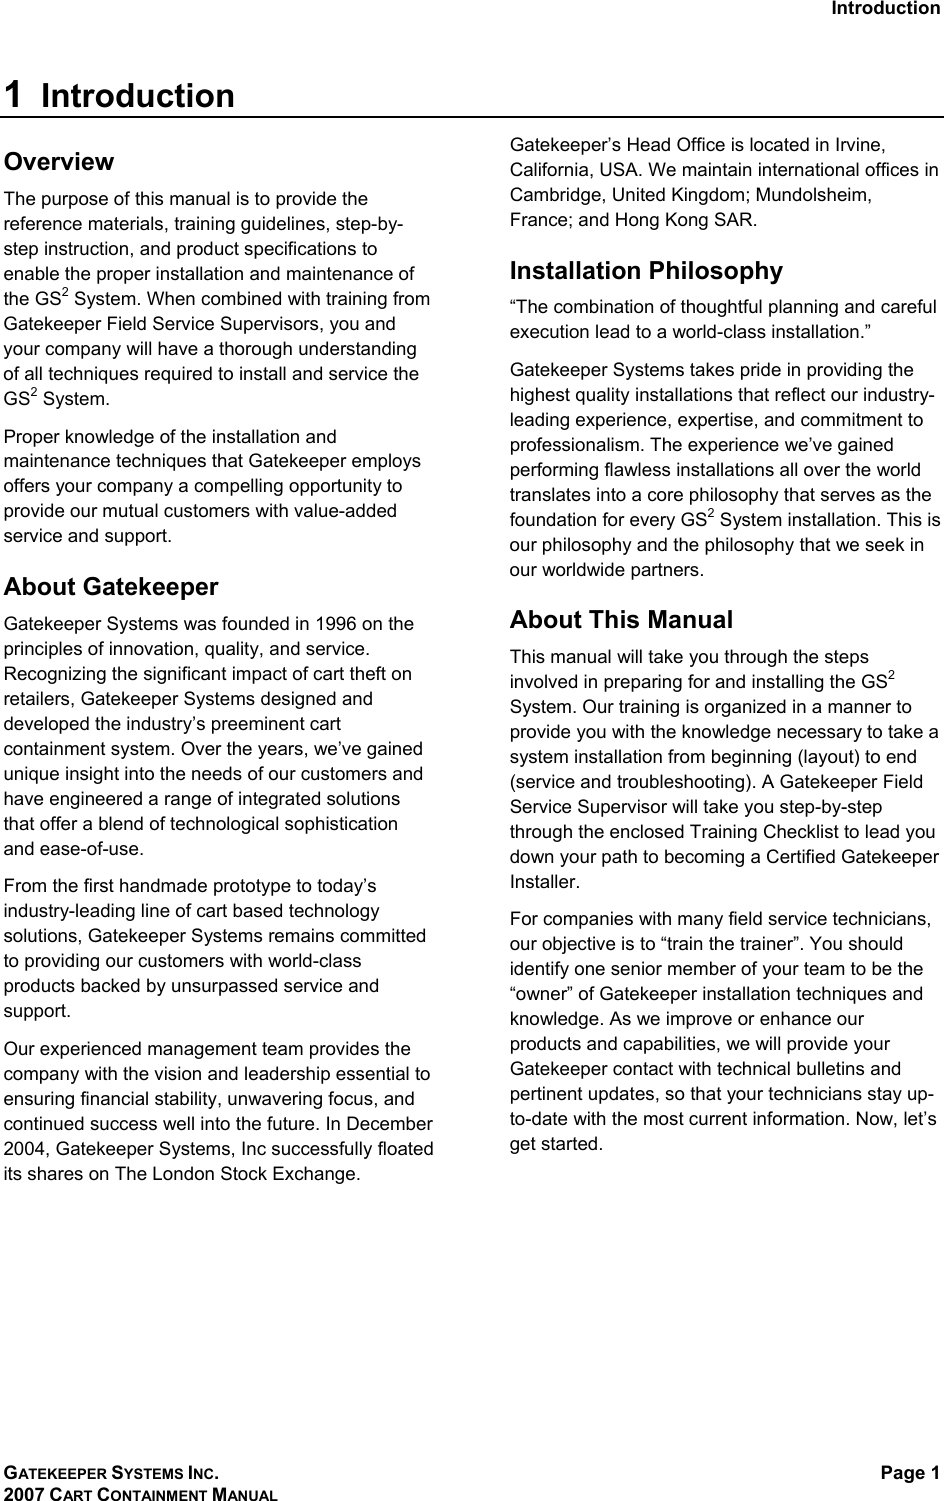 Introduction GATEKEEPER SYSTEMS INC. 2007 CART CONTAINMENT MANUAL Page 1  1  Introduction Overview The purpose of this manual is to provide the reference materials, training guidelines, step-by-step instruction, and product specifications to enable the proper installation and maintenance of the GS2 System. When combined with training from Gatekeeper Field Service Supervisors, you and your company will have a thorough understanding of all techniques required to install and service the GS2 System. Proper knowledge of the installation and maintenance techniques that Gatekeeper employs offers your company a compelling opportunity to provide our mutual customers with value-added service and support. About Gatekeeper Gatekeeper Systems was founded in 1996 on the principles of innovation, quality, and service. Recognizing the significant impact of cart theft on retailers, Gatekeeper Systems designed and developed the industry’s preeminent cart containment system. Over the years, we’ve gained unique insight into the needs of our customers and have engineered a range of integrated solutions that offer a blend of technological sophistication and ease-of-use.  From the first handmade prototype to today’s industry-leading line of cart based technology solutions, Gatekeeper Systems remains committed to providing our customers with world-class products backed by unsurpassed service and support. Our experienced management team provides the company with the vision and leadership essential to ensuring financial stability, unwavering focus, and continued success well into the future. In December 2004, Gatekeeper Systems, Inc successfully floated its shares on The London Stock Exchange. Gatekeeper’s Head Office is located in Irvine, California, USA. We maintain international offices in Cambridge, United Kingdom; Mundolsheim, France; and Hong Kong SAR. Installation Philosophy “The combination of thoughtful planning and careful execution lead to a world-class installation.” Gatekeeper Systems takes pride in providing the highest quality installations that reflect our industry-leading experience, expertise, and commitment to professionalism. The experience we’ve gained performing flawless installations all over the world translates into a core philosophy that serves as the foundation for every GS2 System installation. This is our philosophy and the philosophy that we seek in our worldwide partners. About This Manual This manual will take you through the steps involved in preparing for and installing the GS2 System. Our training is organized in a manner to provide you with the knowledge necessary to take a system installation from beginning (layout) to end (service and troubleshooting). A Gatekeeper Field Service Supervisor will take you step-by-step through the enclosed Training Checklist to lead you down your path to becoming a Certified Gatekeeper Installer. For companies with many field service technicians, our objective is to “train the trainer”. You should identify one senior member of your team to be the “owner” of Gatekeeper installation techniques and knowledge. As we improve or enhance our products and capabilities, we will provide your Gatekeeper contact with technical bulletins and pertinent updates, so that your technicians stay up-to-date with the most current information. Now, let’s get started.  